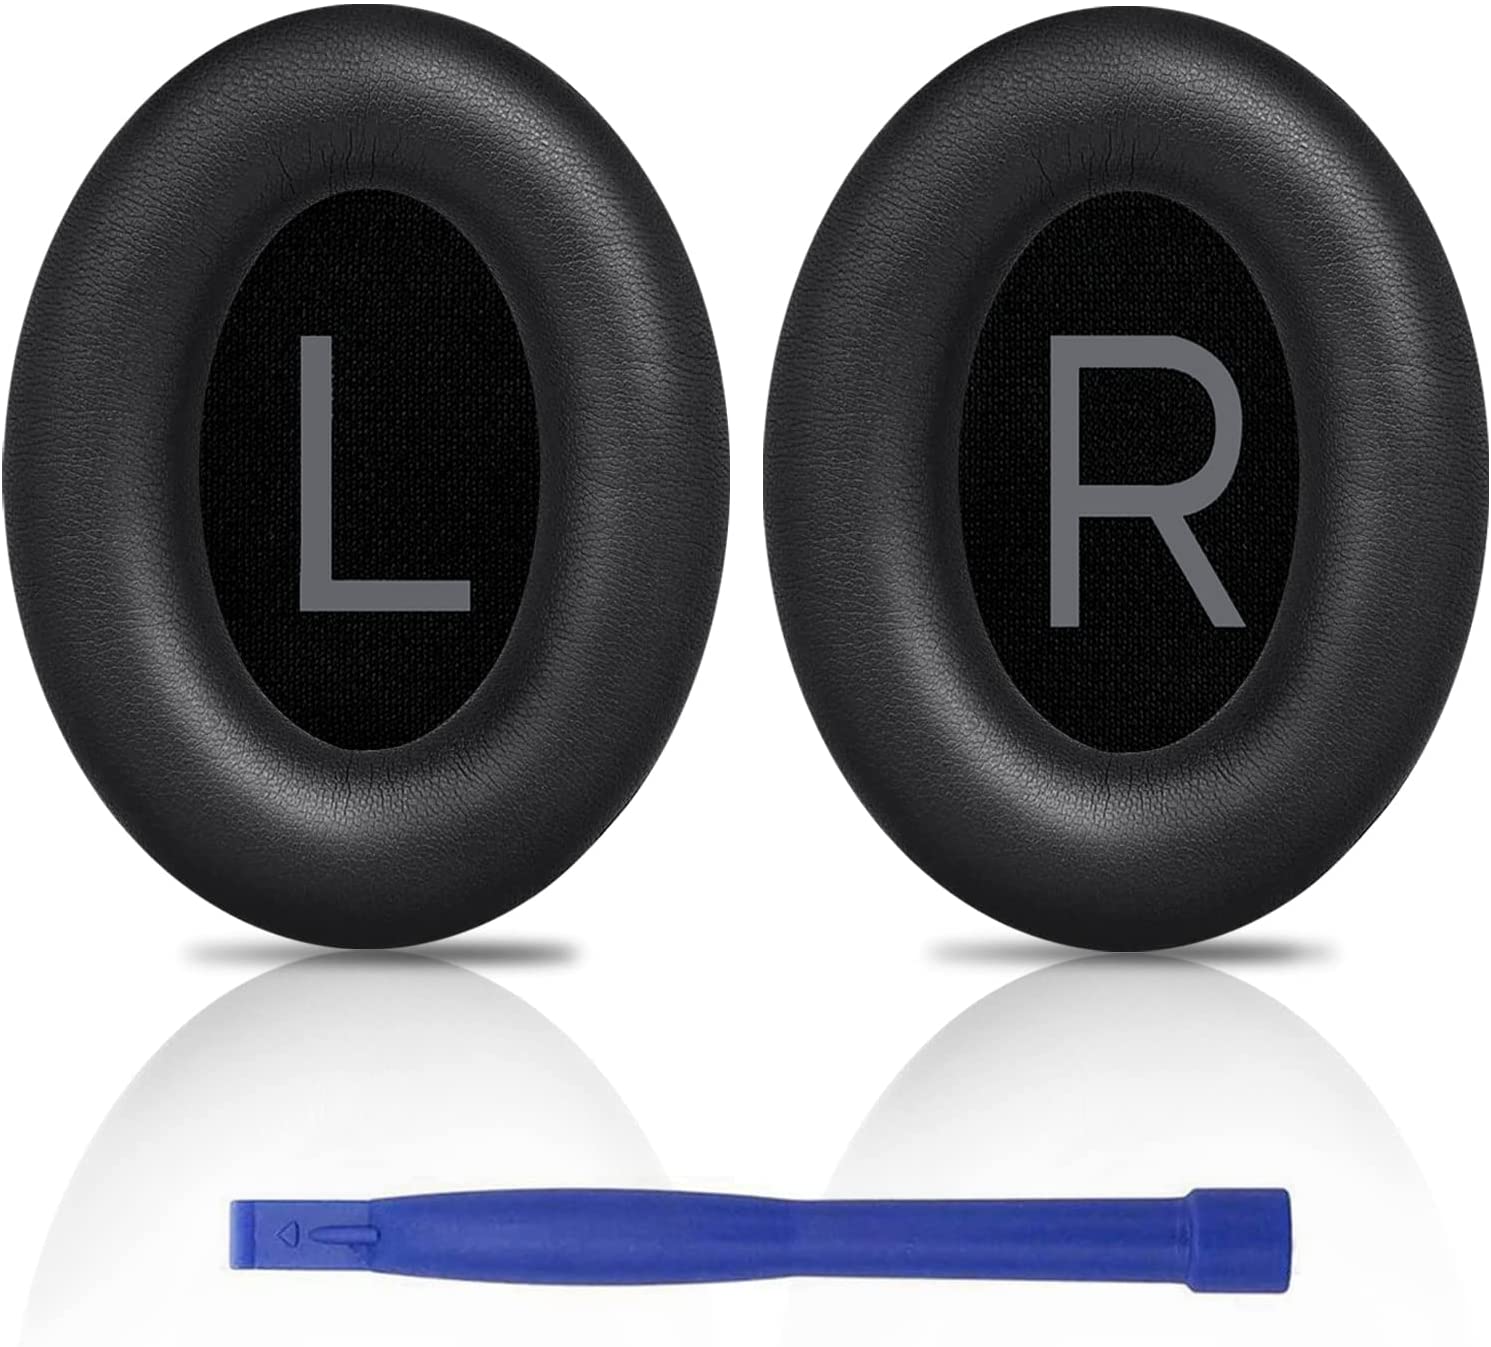 Professional Ear Pads Cushions Replacement for Bose QuietComfort 45 (QC45) Over-Ear Headphones, Ear Pads with Softer Protein Lea